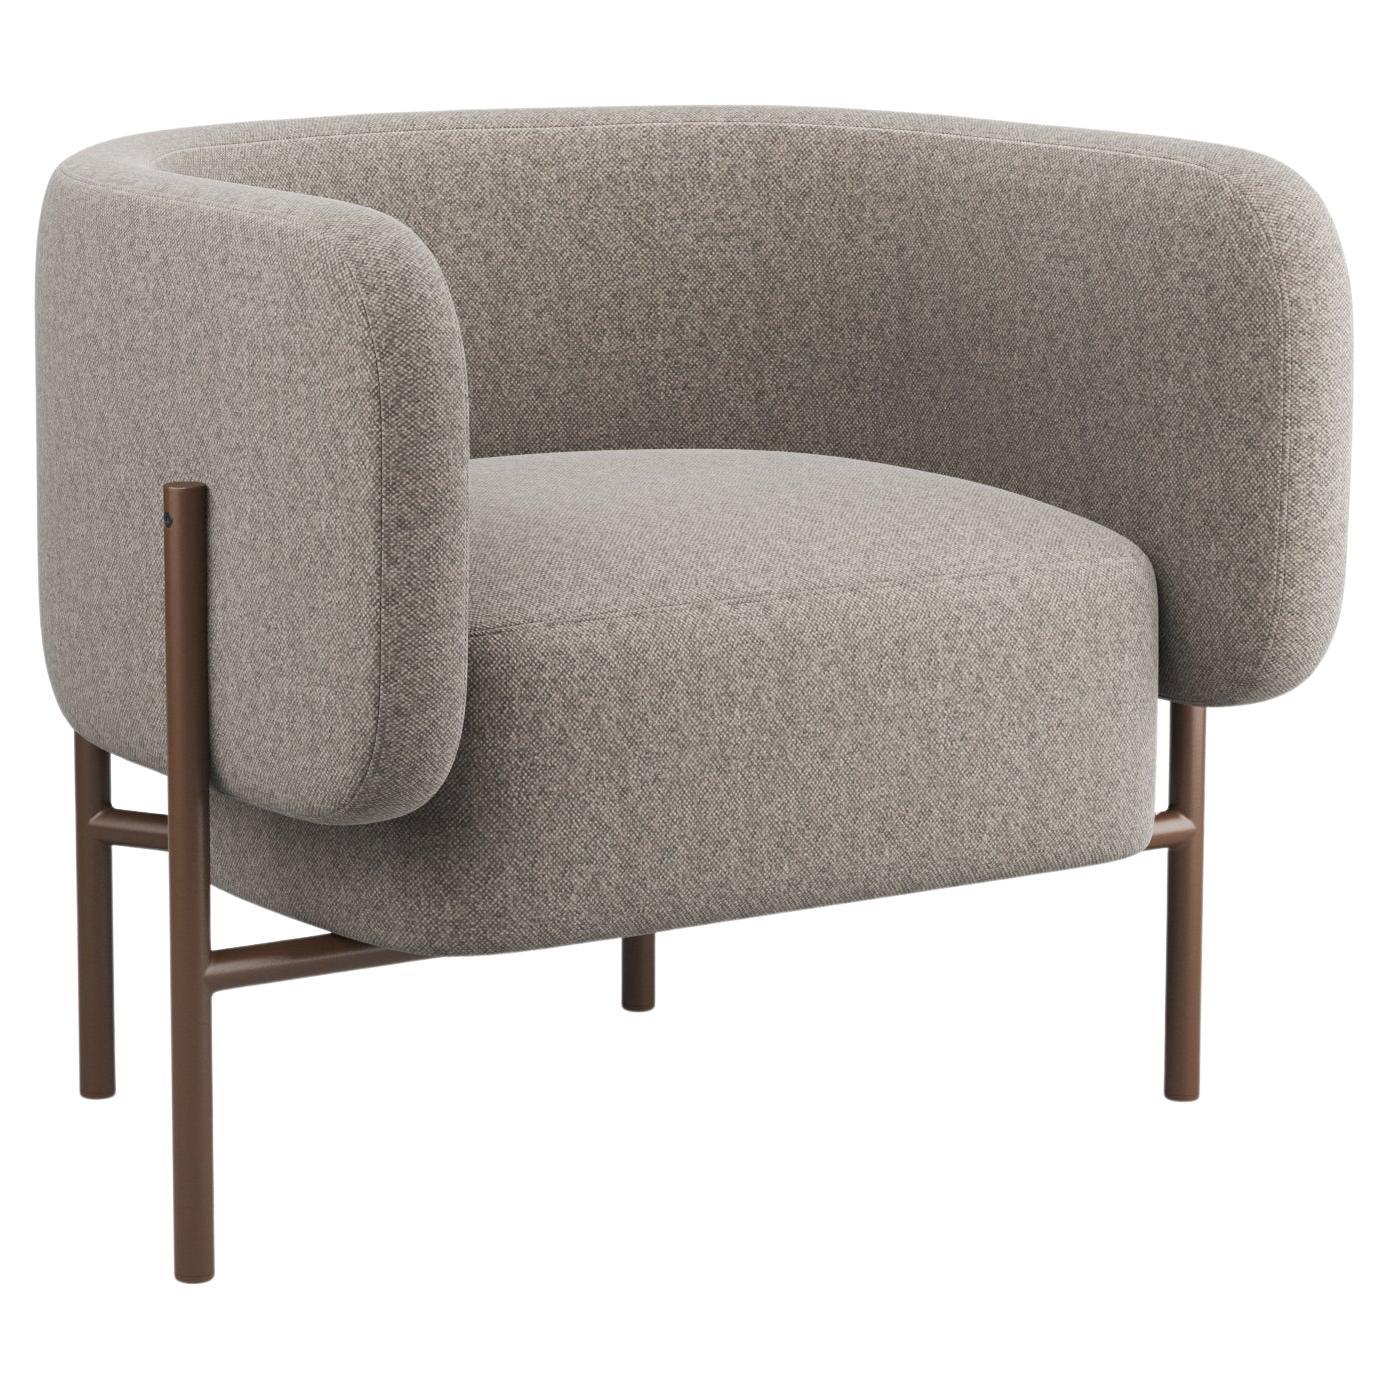 Hayche Abrazo Armchair - Brown, UK, Made to Order For Sale